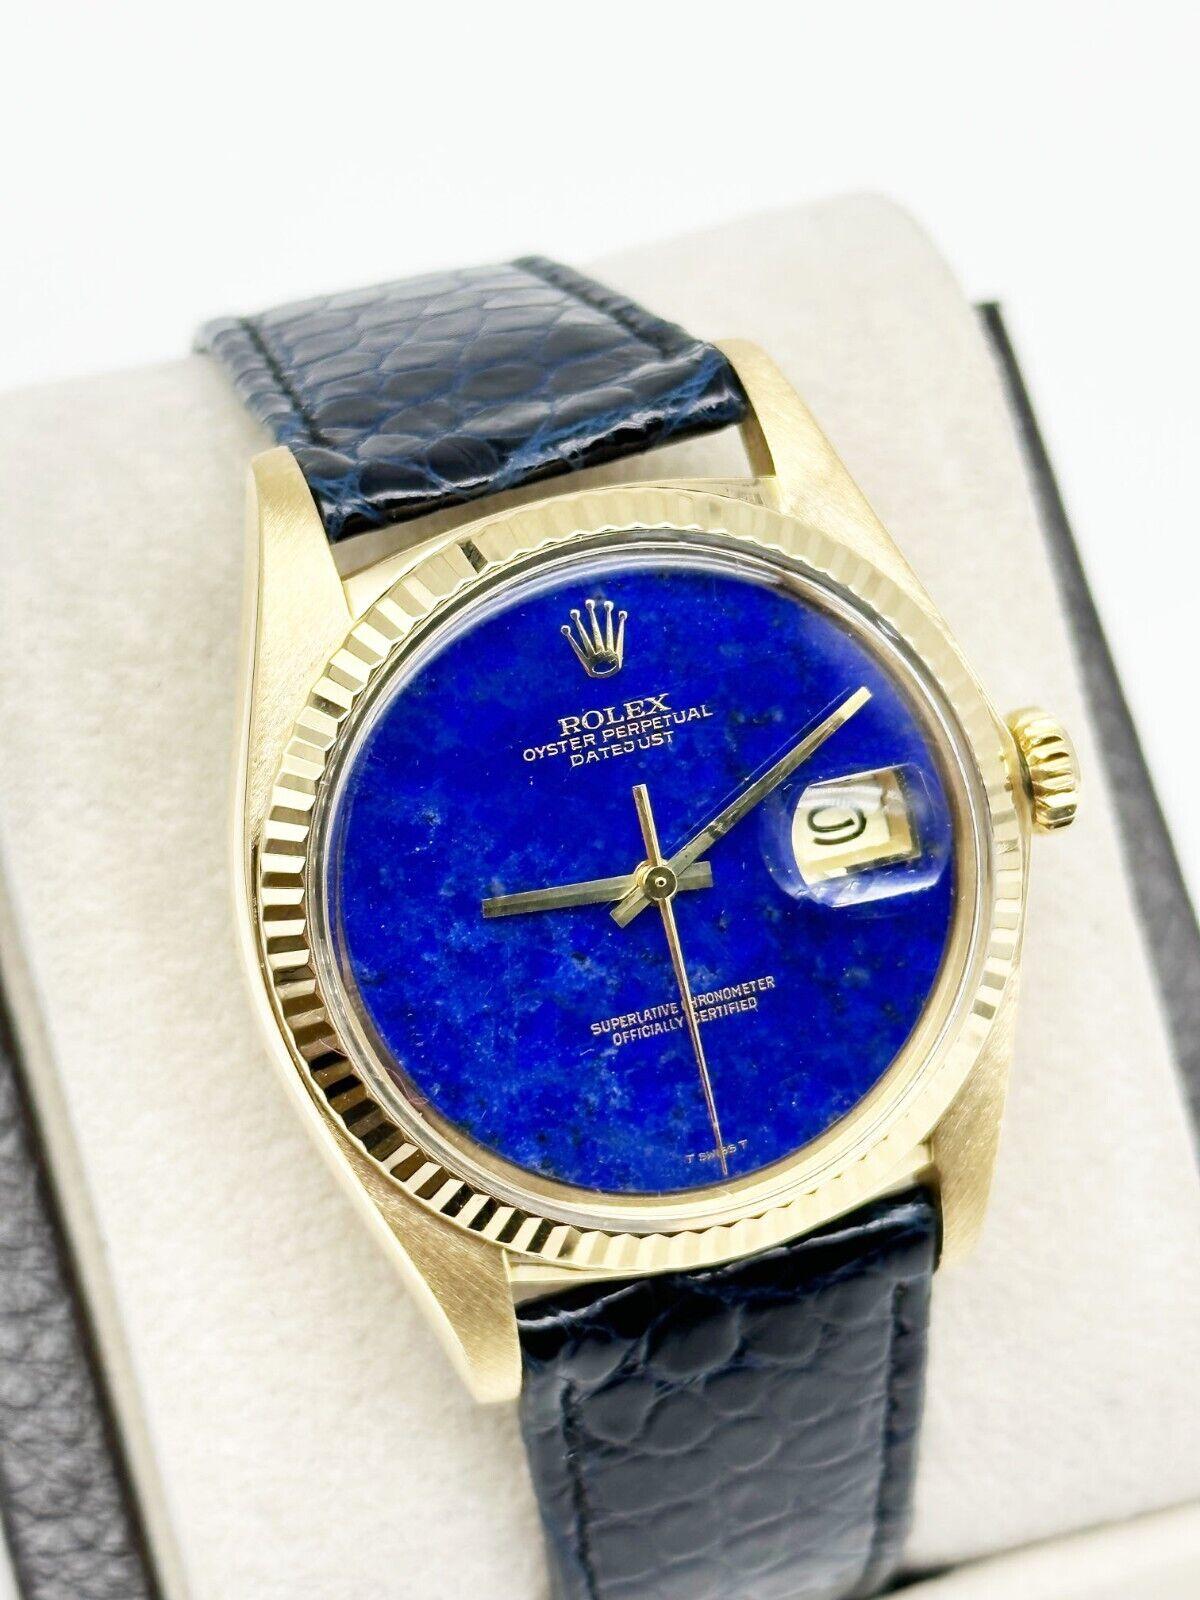 Style Number: 1601

 

Serial: 6061***

Year: 1978 

Model: Datejust 

Case Material: 18K Yellow Gold 

Band: Navy Blue Leather Strap with Custom Clasp 

Bezel: 18K Yellow Gold 

Dial: Custom Lapis Lazuli Dial 

Face: Acrylic Crystal 

Case Size: